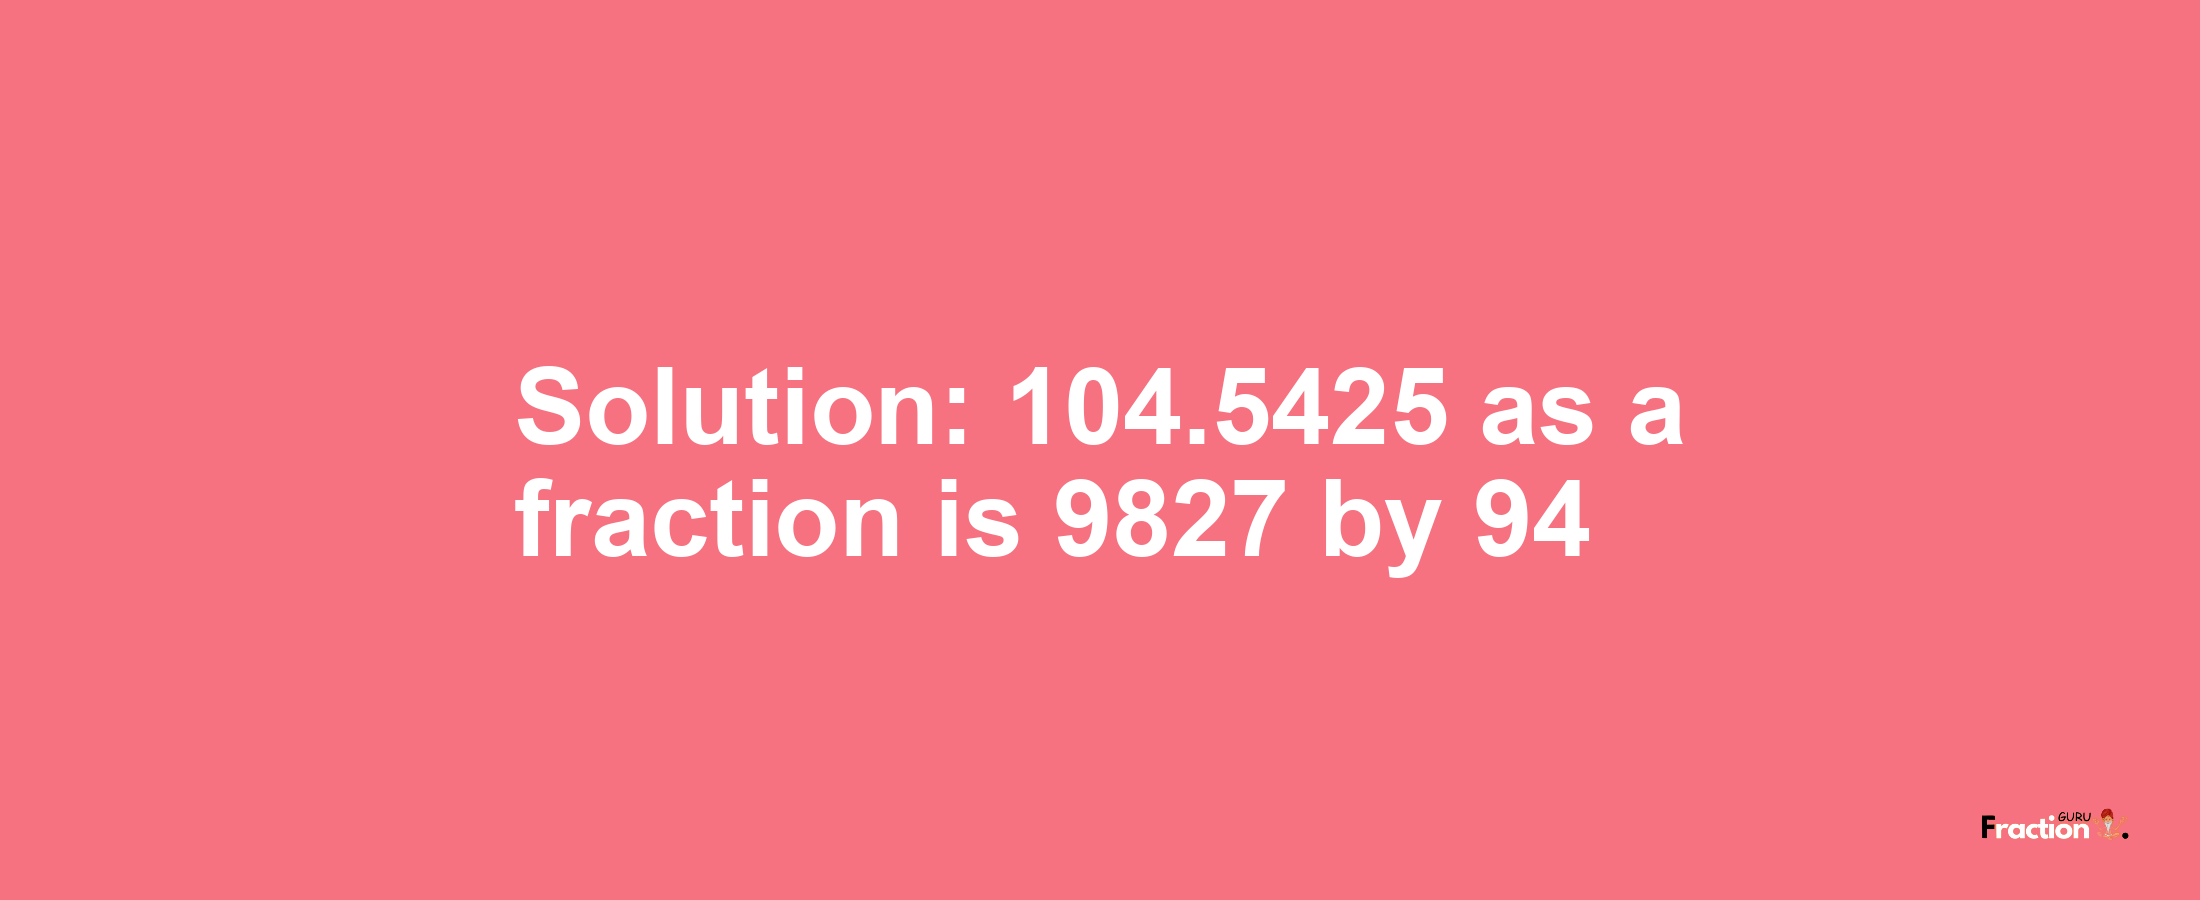 Solution:104.5425 as a fraction is 9827/94